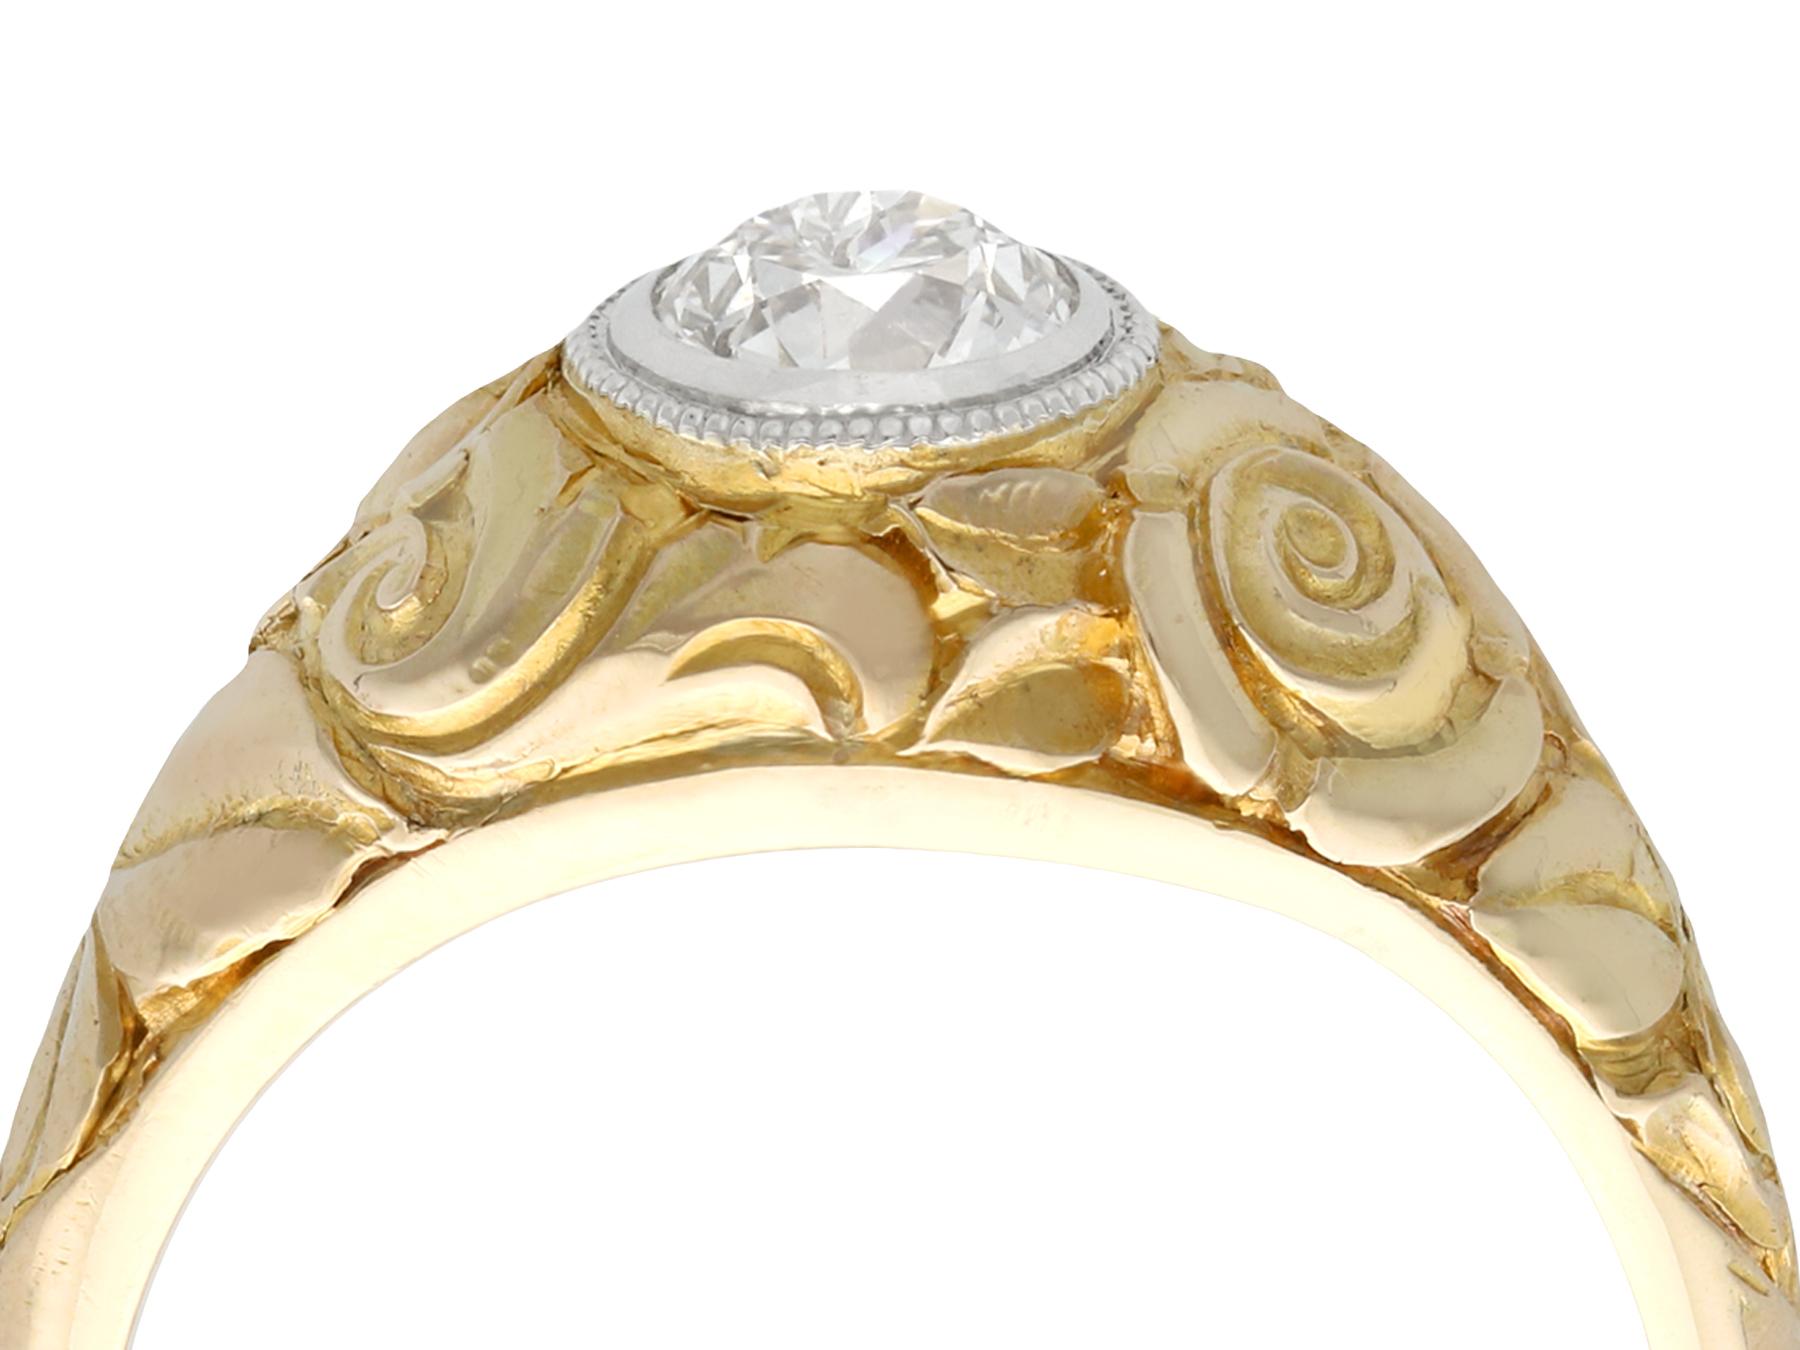 A stunning antique 1900s 0.52 carat diamond and 14 karat yellow gold, 14 karat white gold set solitaire ring; part of our diverse antique jewelry collections.

This stunning, fine and impressive antique 1900s gold and diamond ring has been crafted